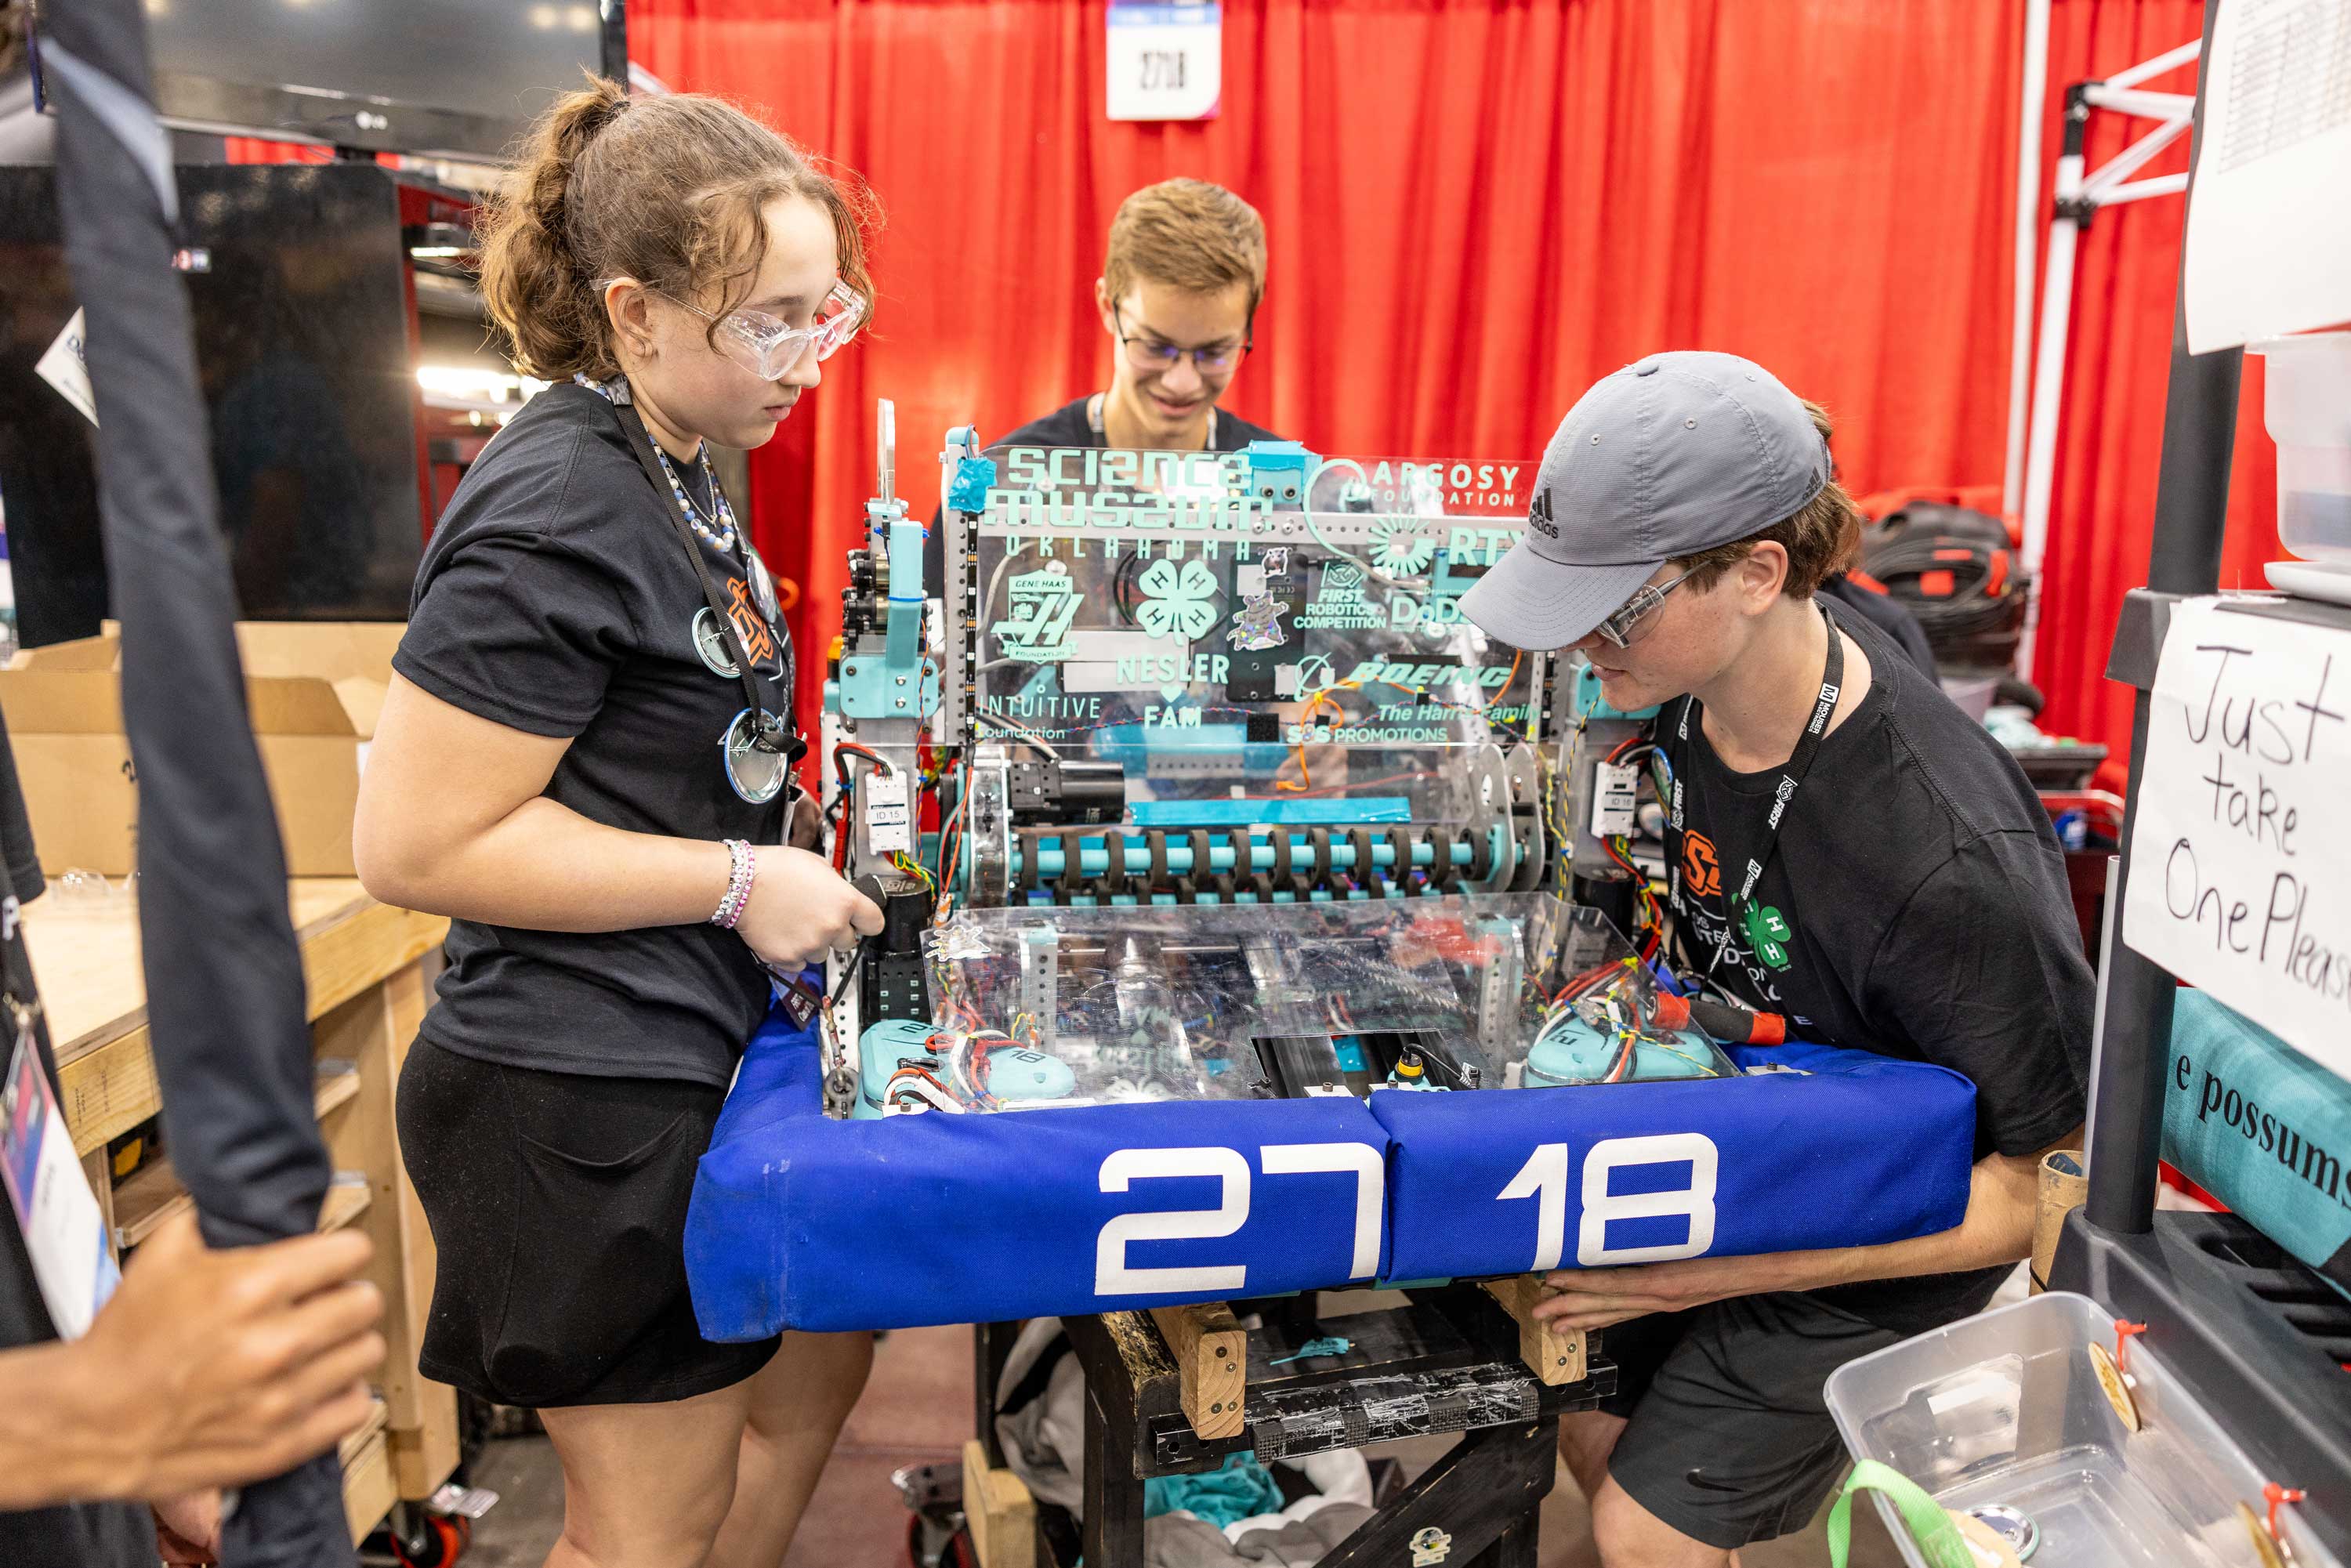 Members of Team OKC work on their robot in Houston at the FIRST Robotics World Championships in April.